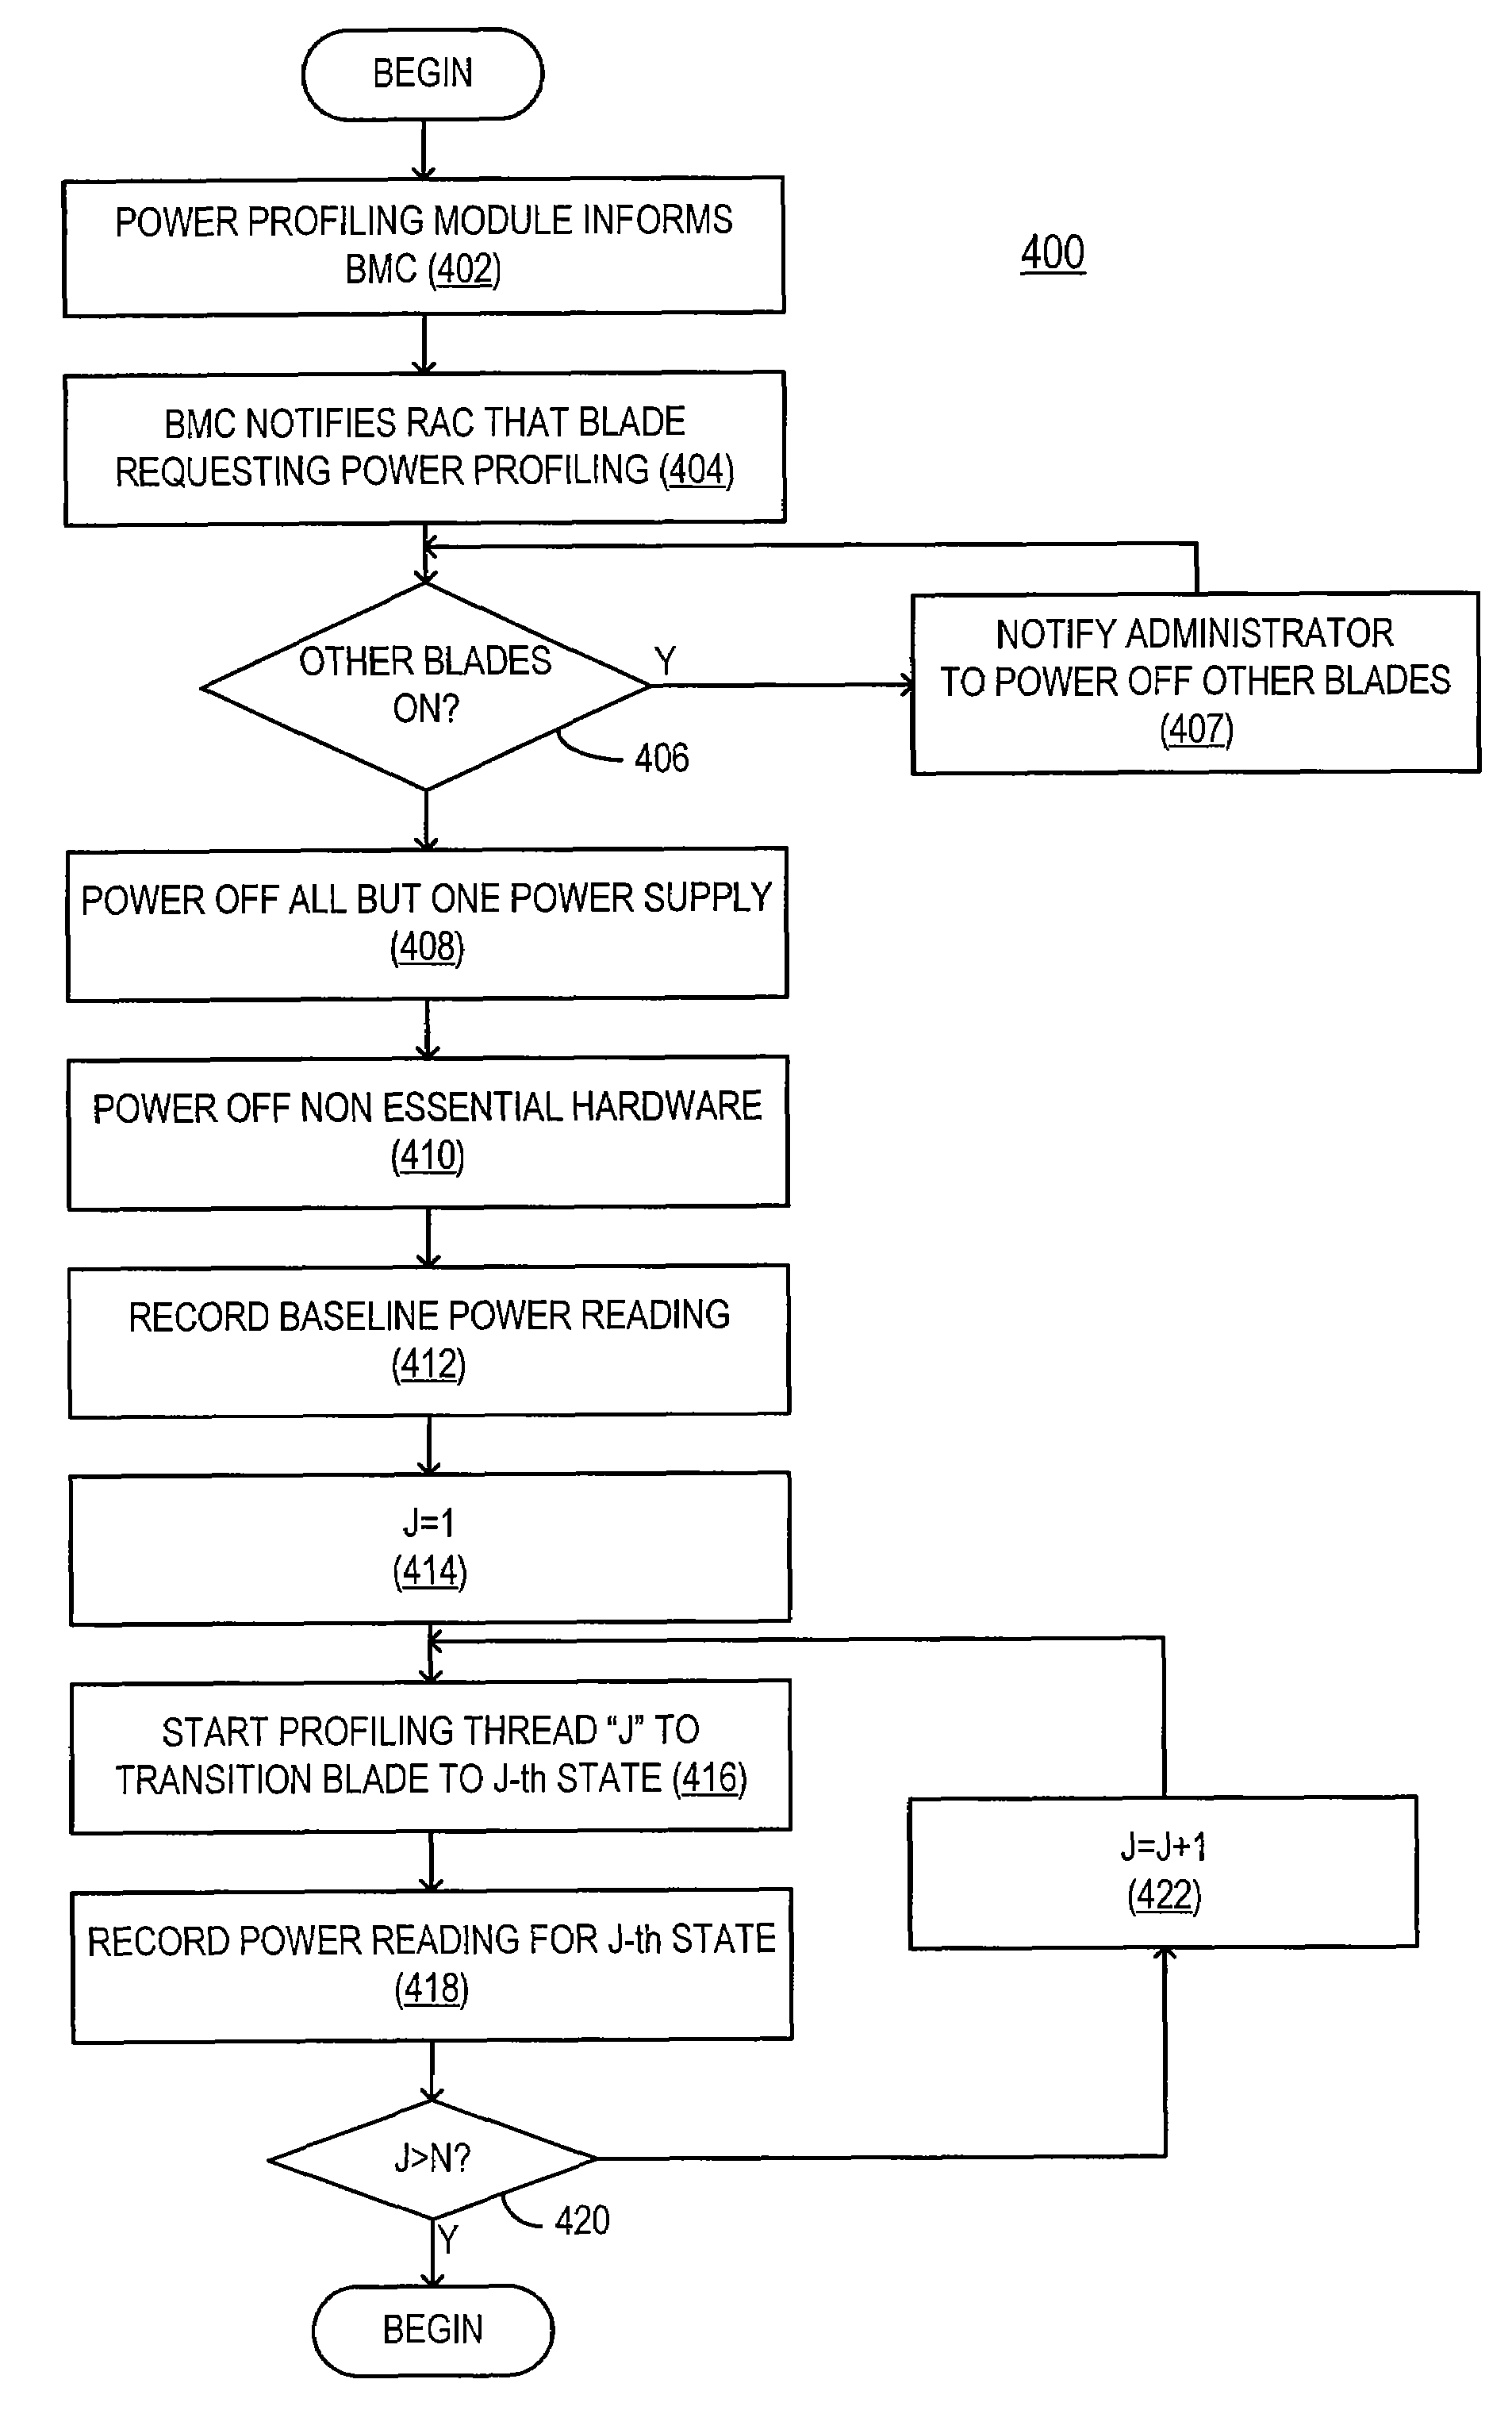 Power profiling application for managing power allocation in an information handling system